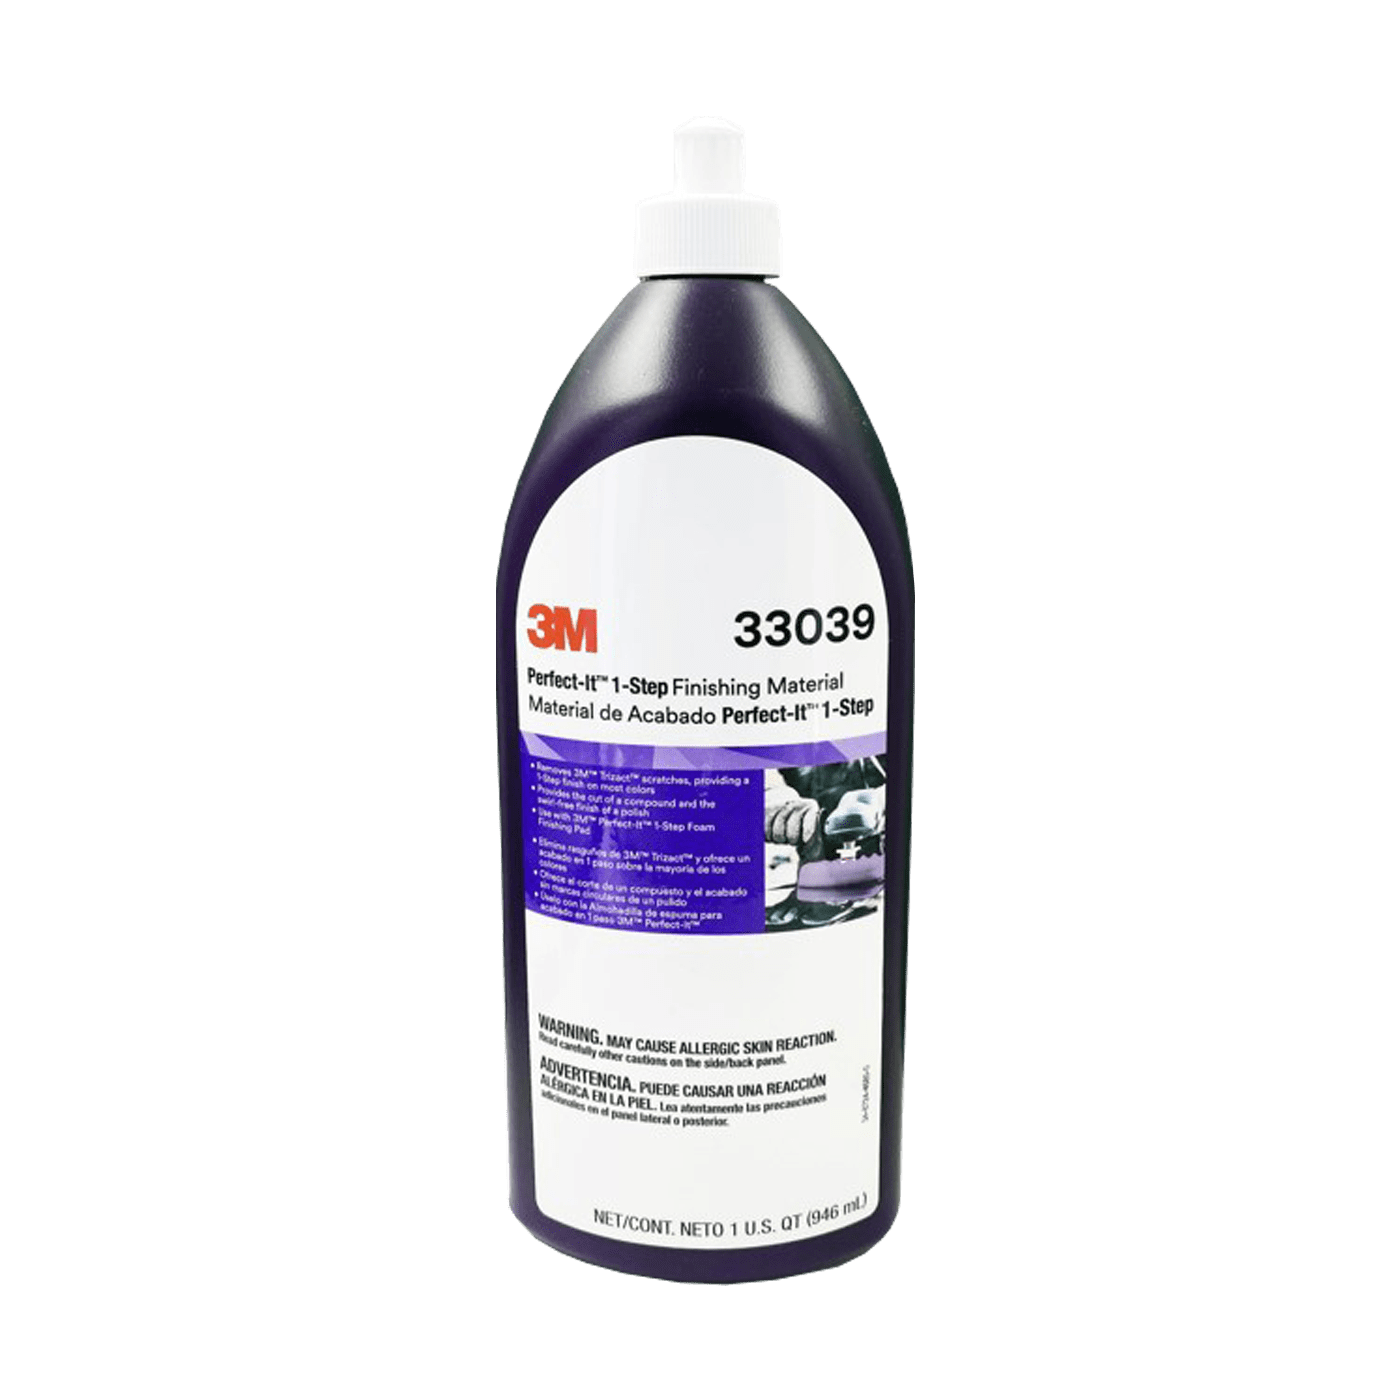 3M Perfect-it 1-Step Finishing Material